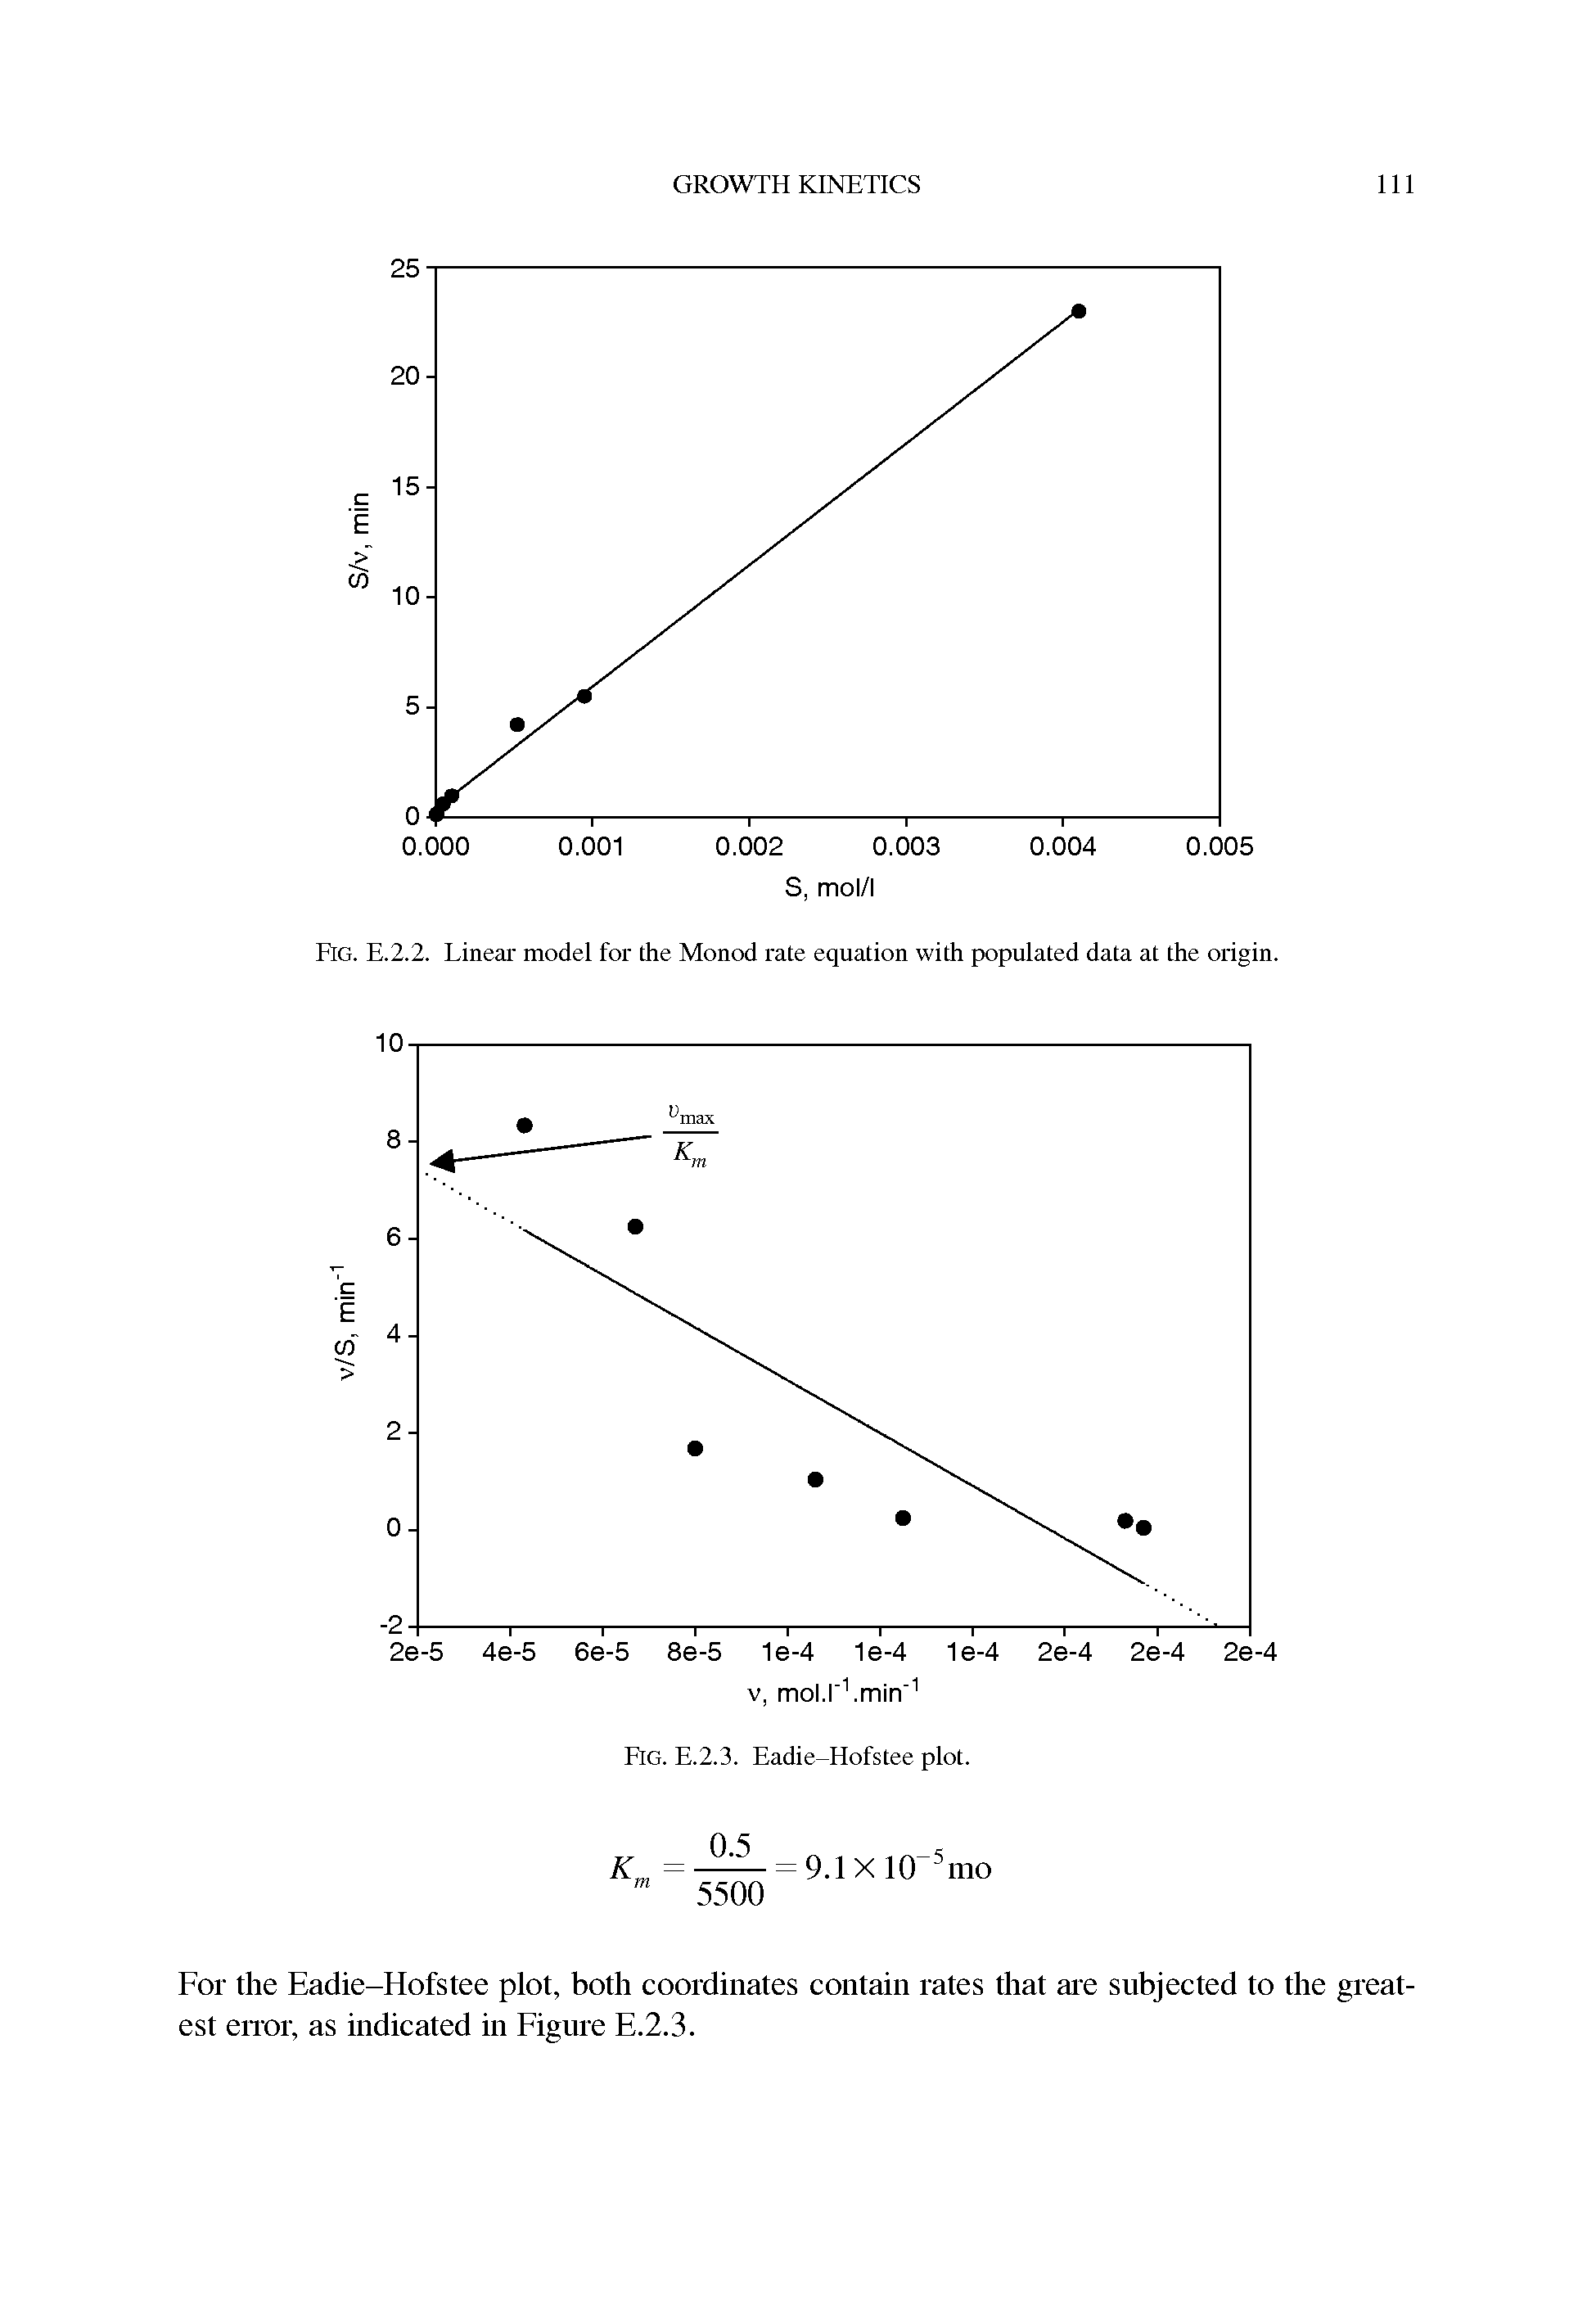 Fig. E.2.2. Linear model for the Monod rate equation with populated data at the origin.